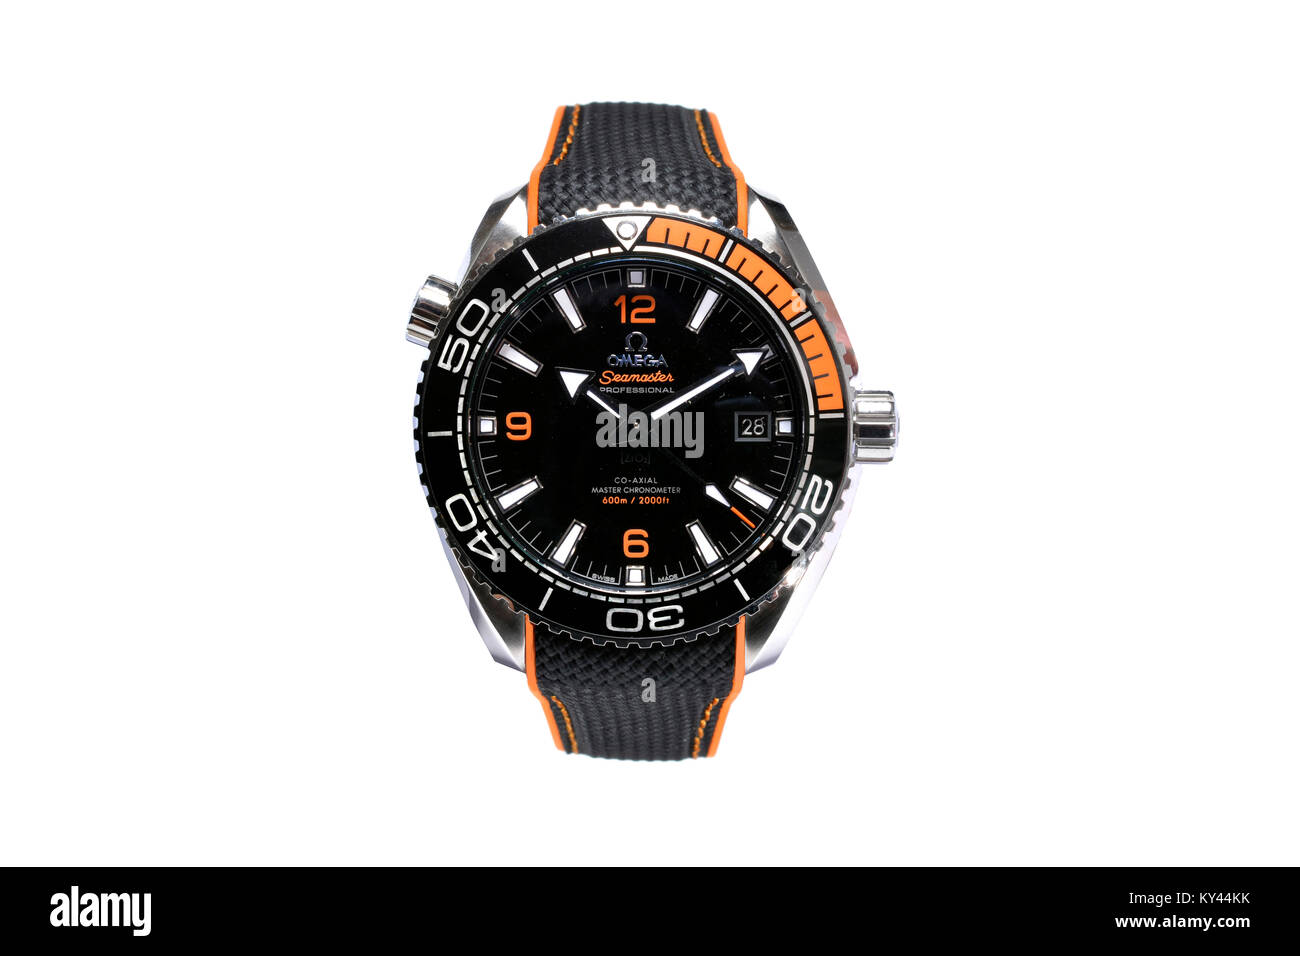 Omega Seamaster stainless steel man's watch with a black and orange face and braided nylon wrist band Stock Photo